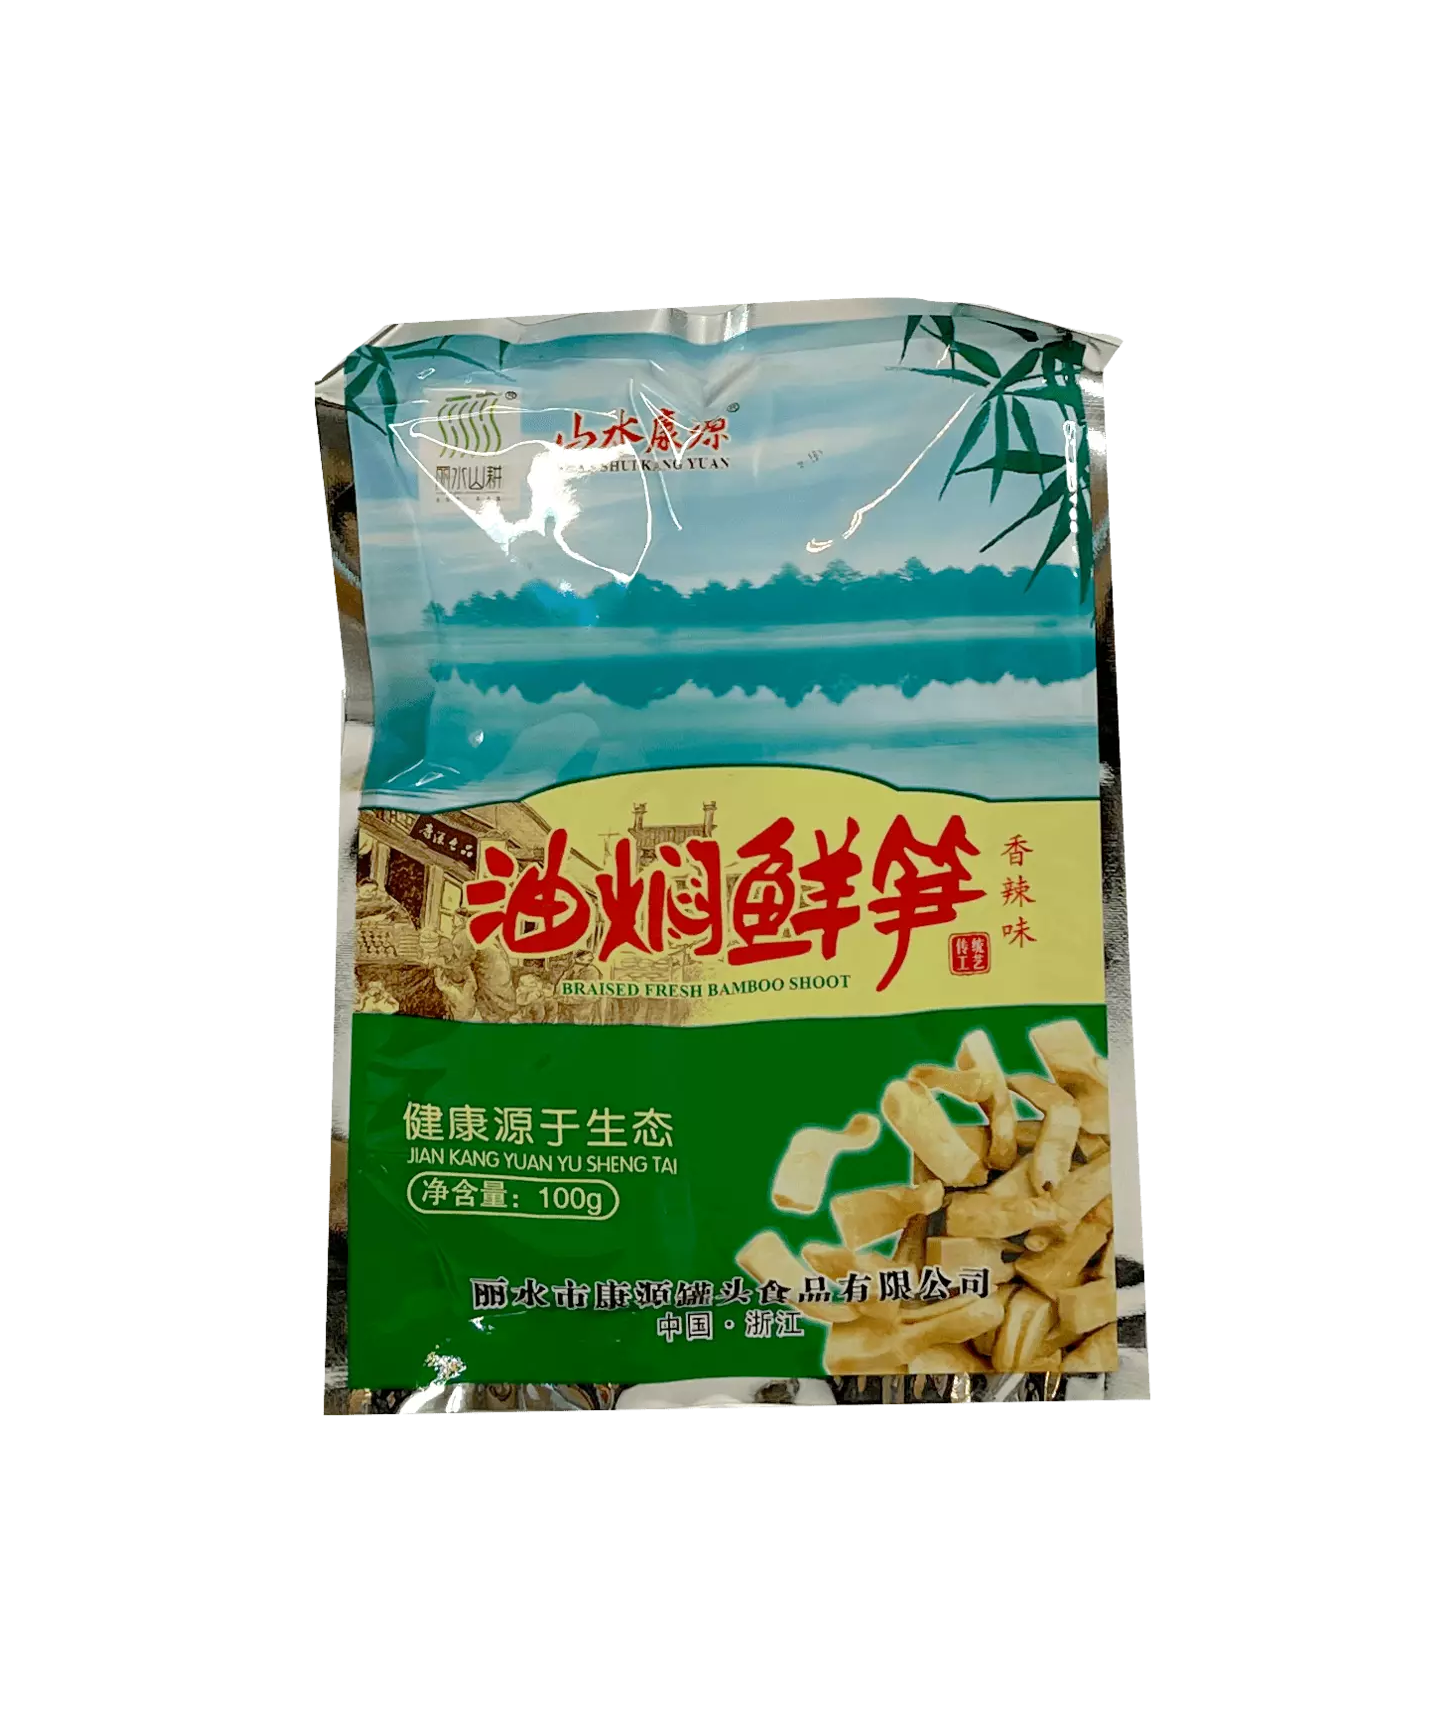 Best Before: 2022.11.16 Bamboo in Oil Spicy 100g Shan Shui Kang Yuan China